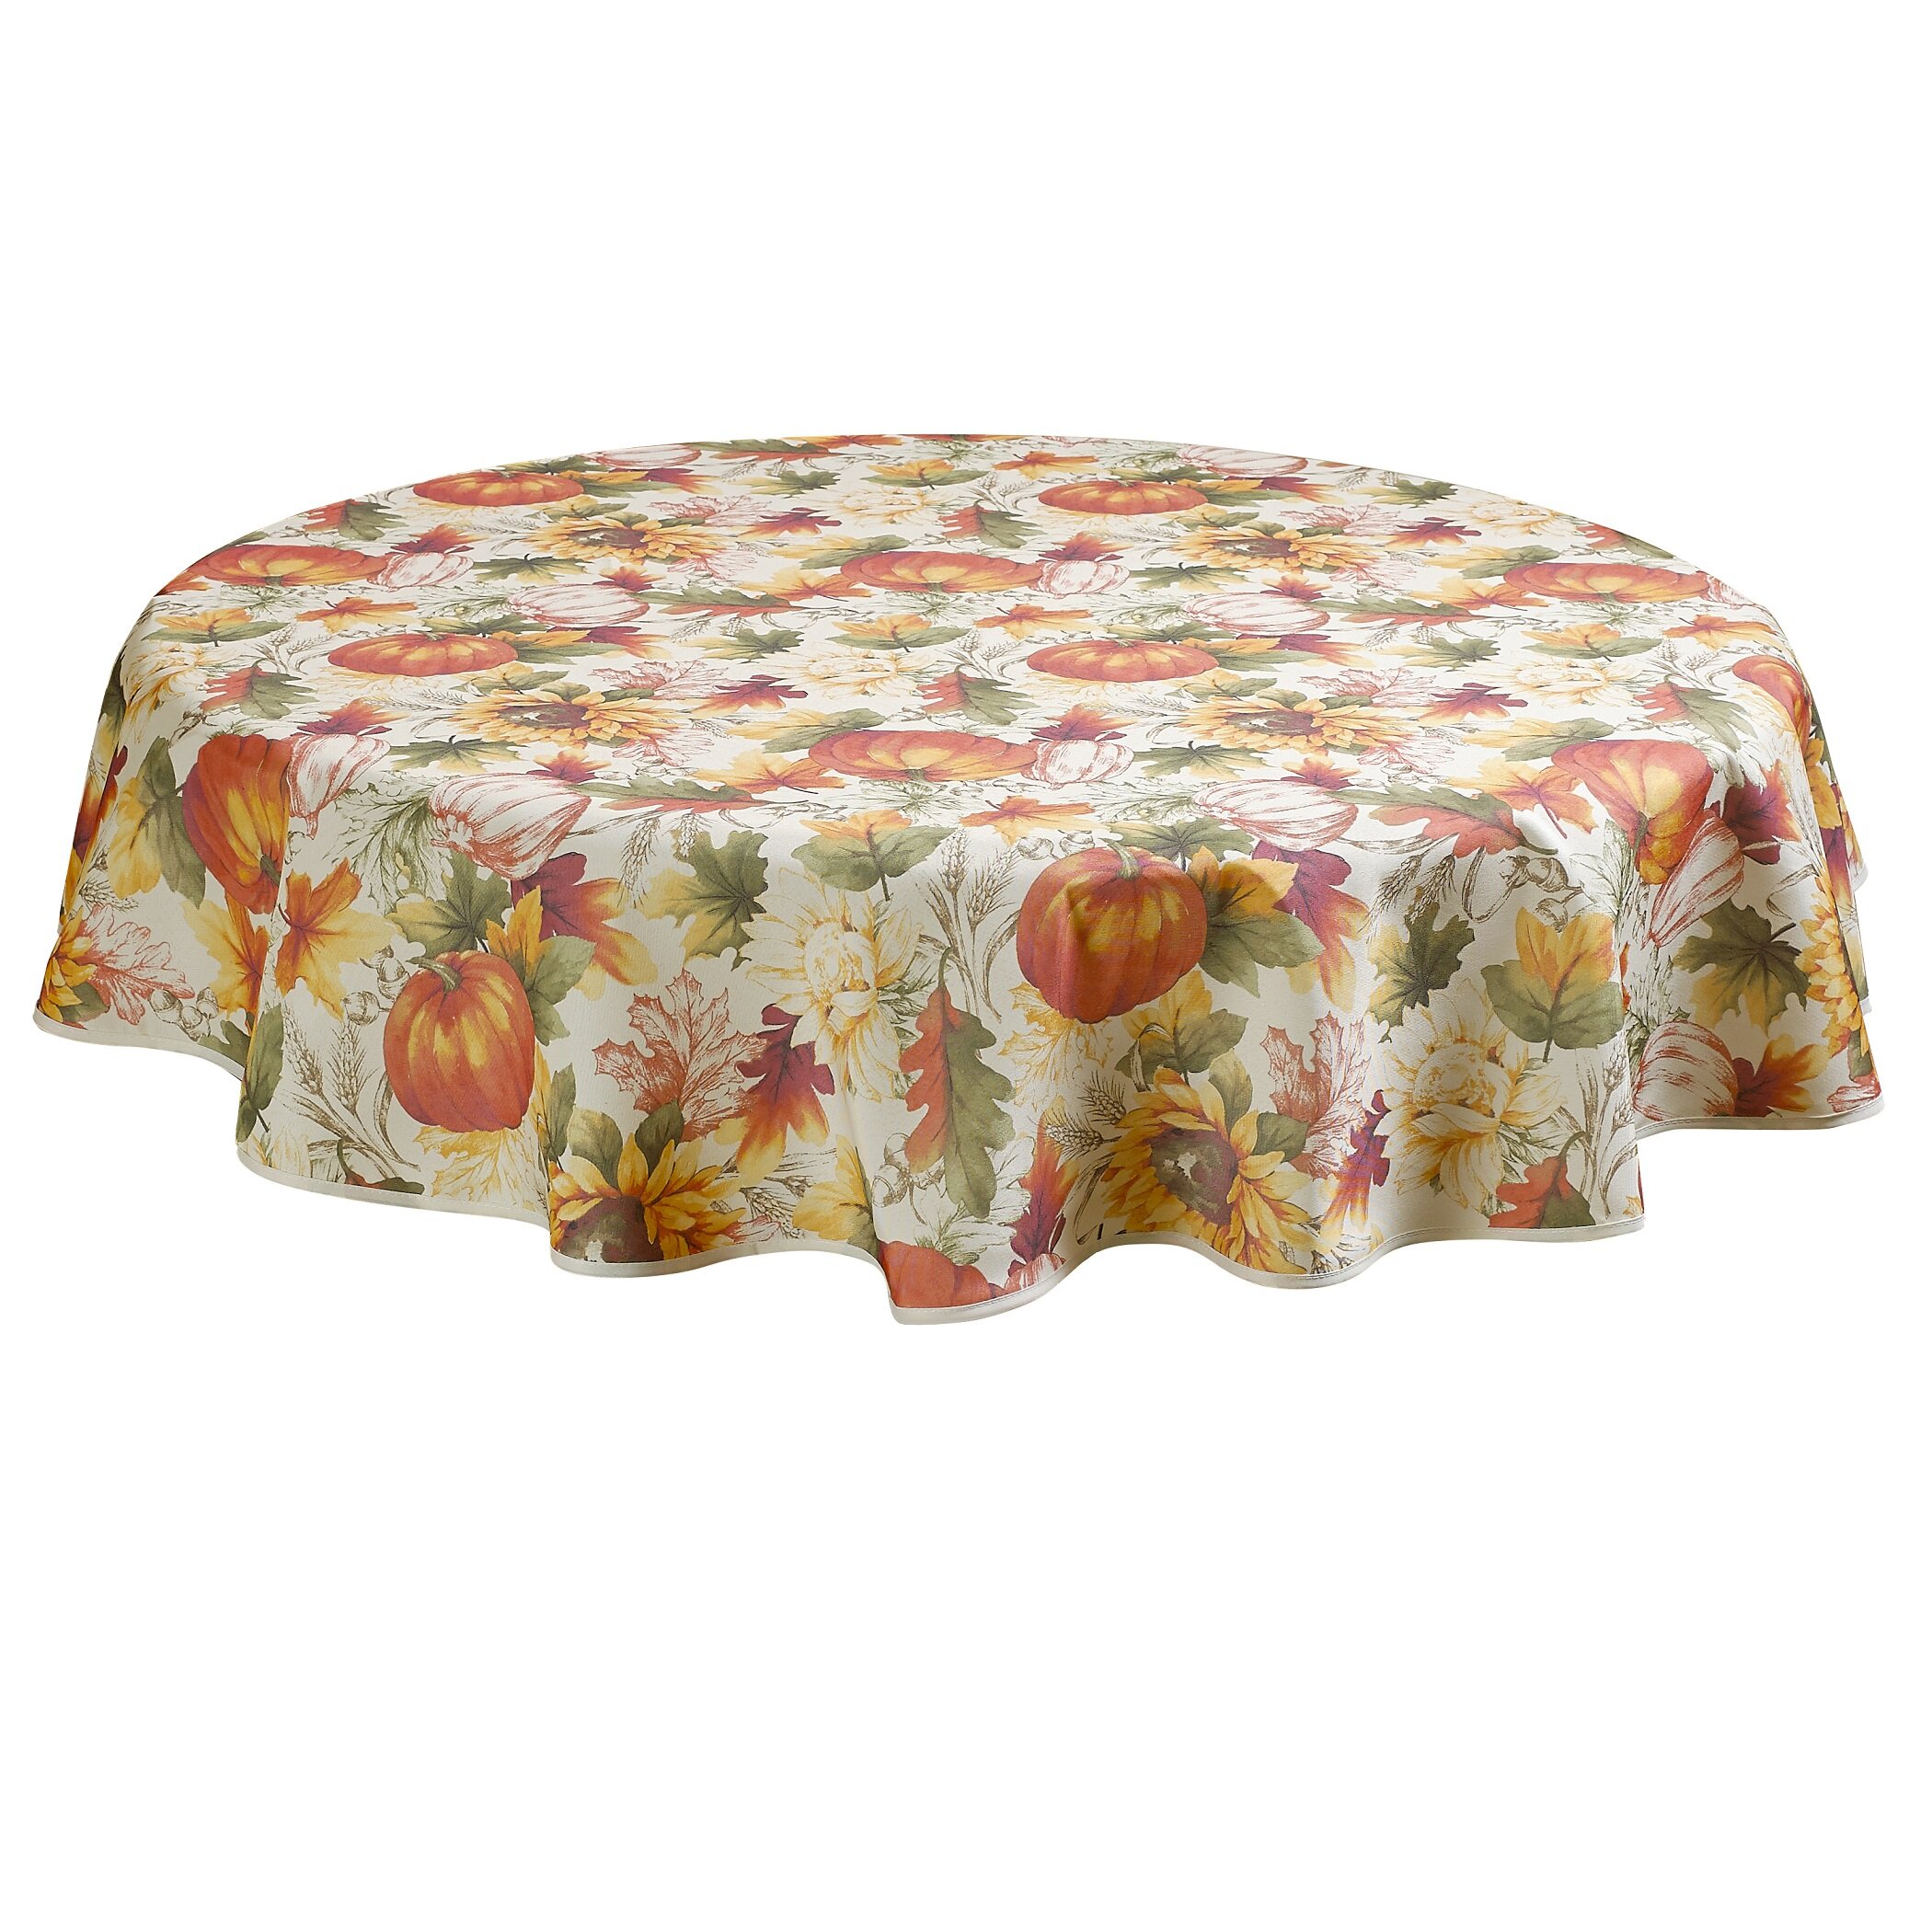 printed tablecloth